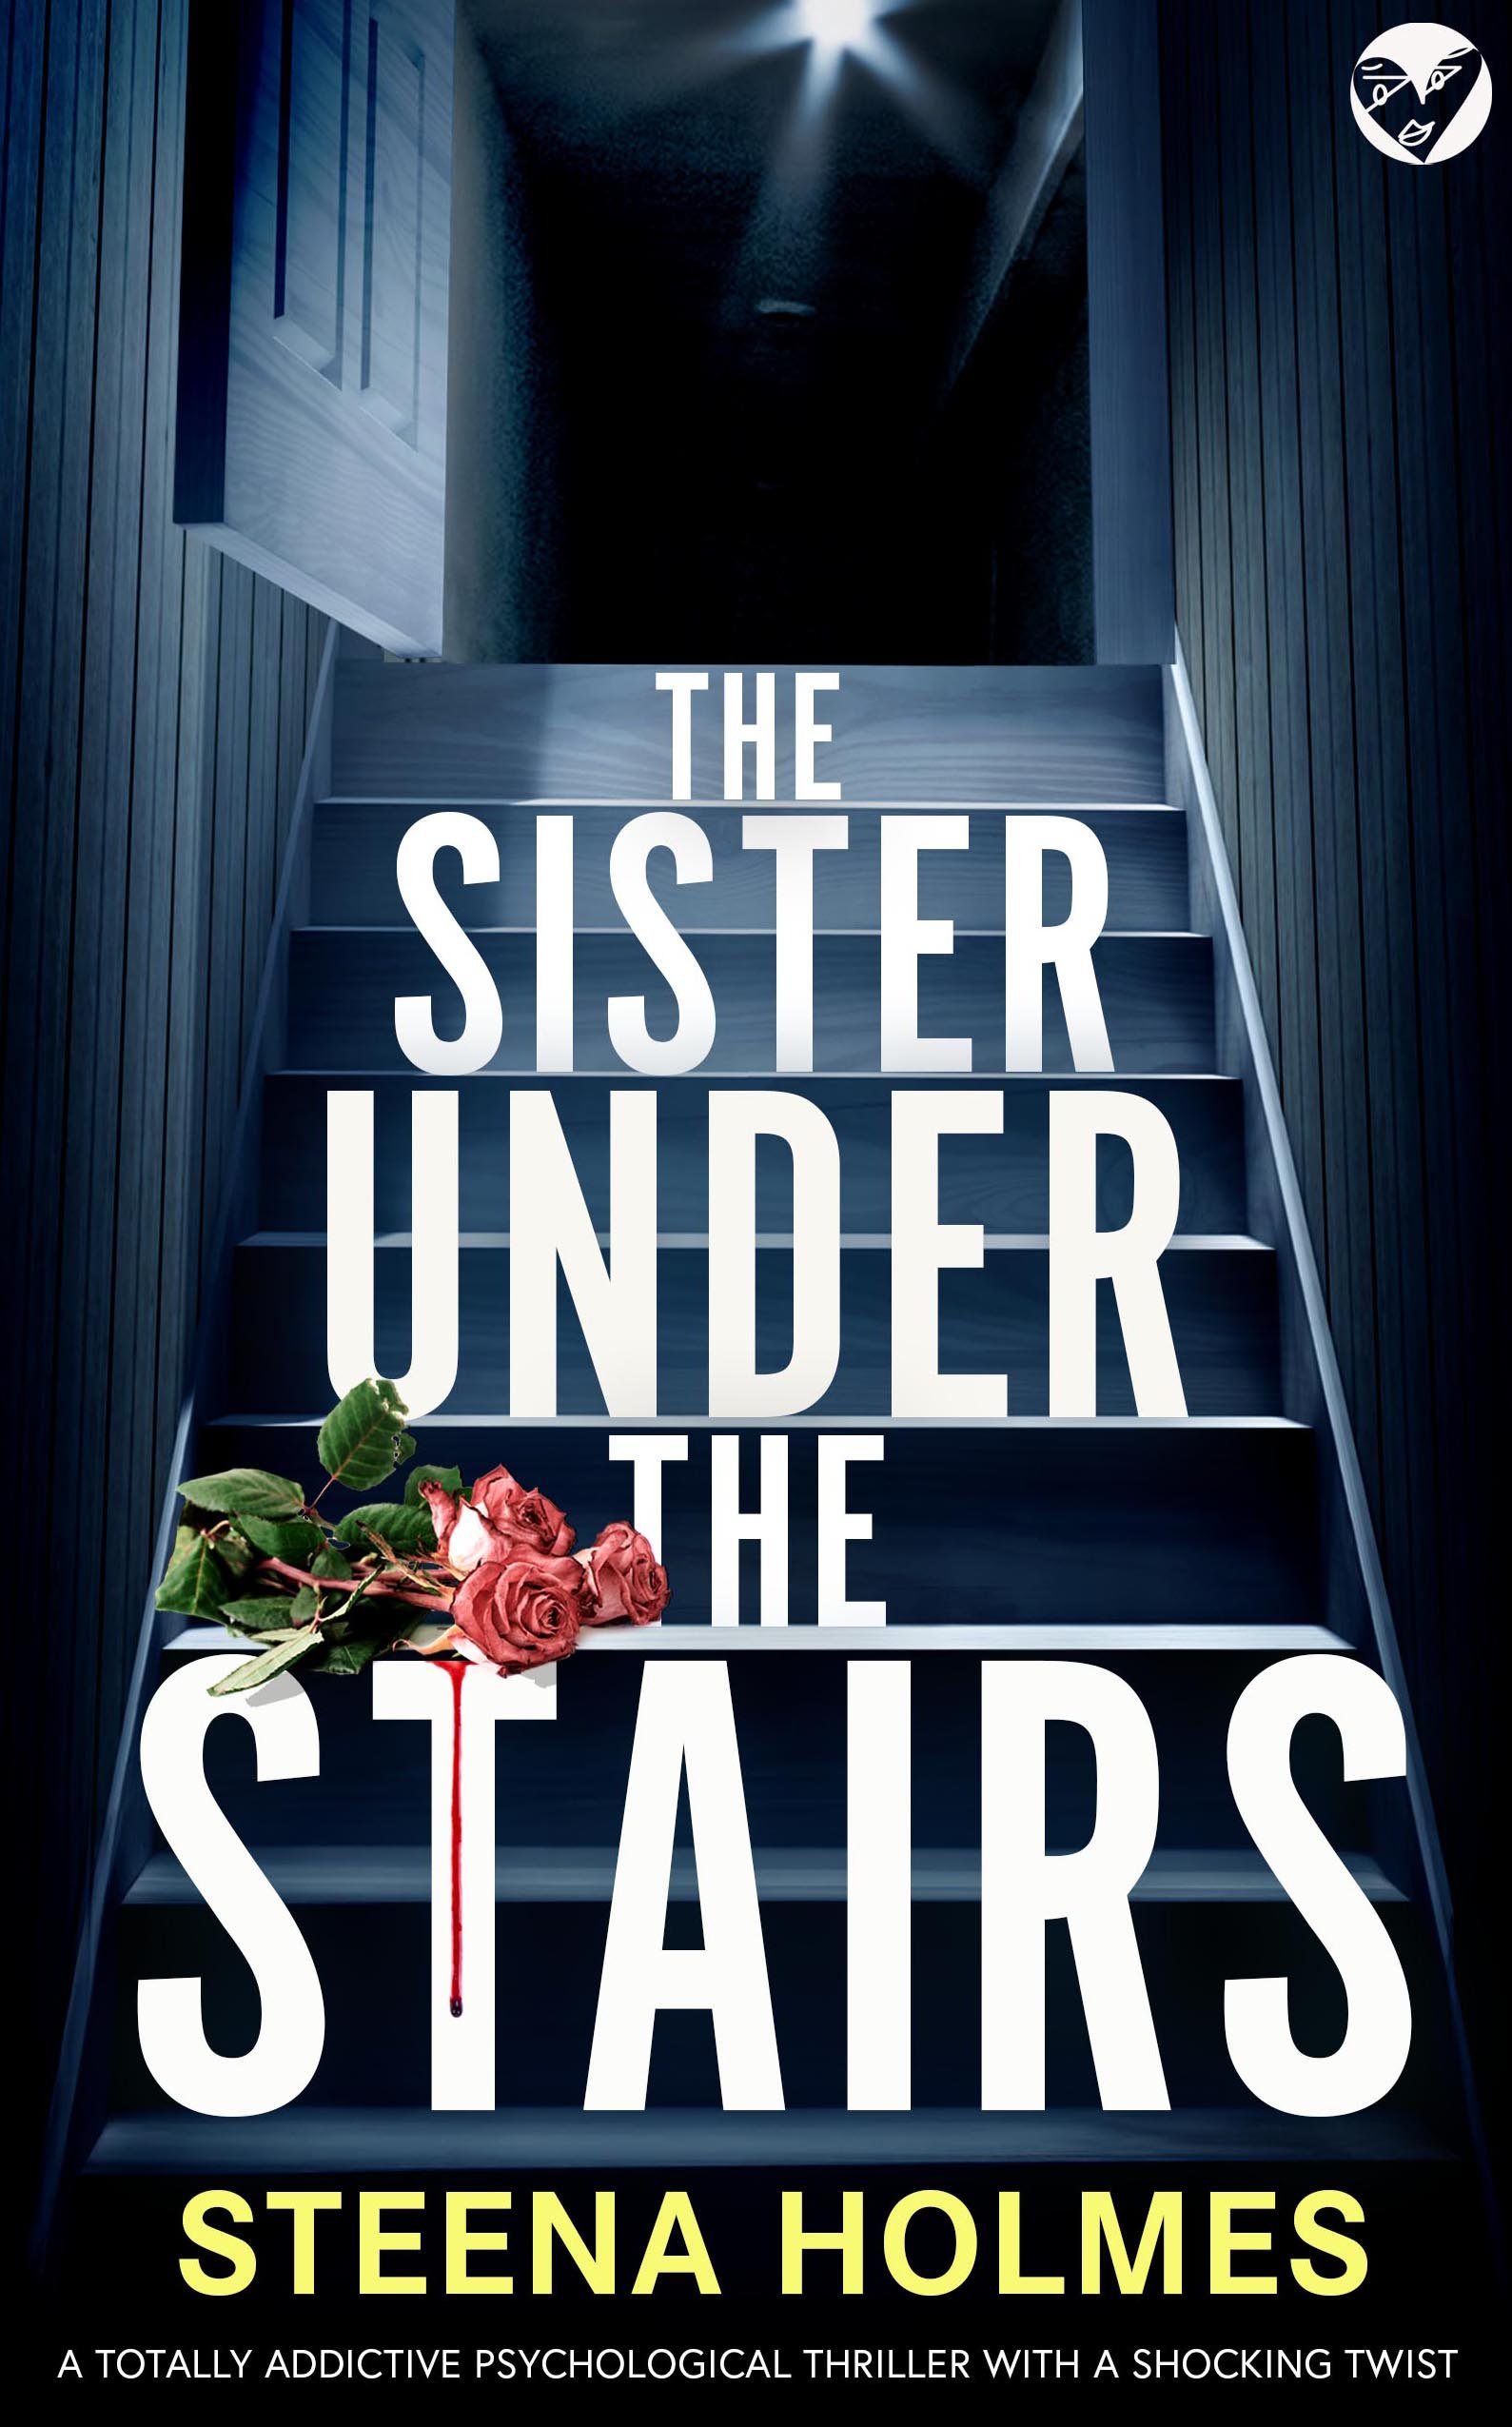 THE SISTER UNDER THE STAIRS 528k cover publish.jpg